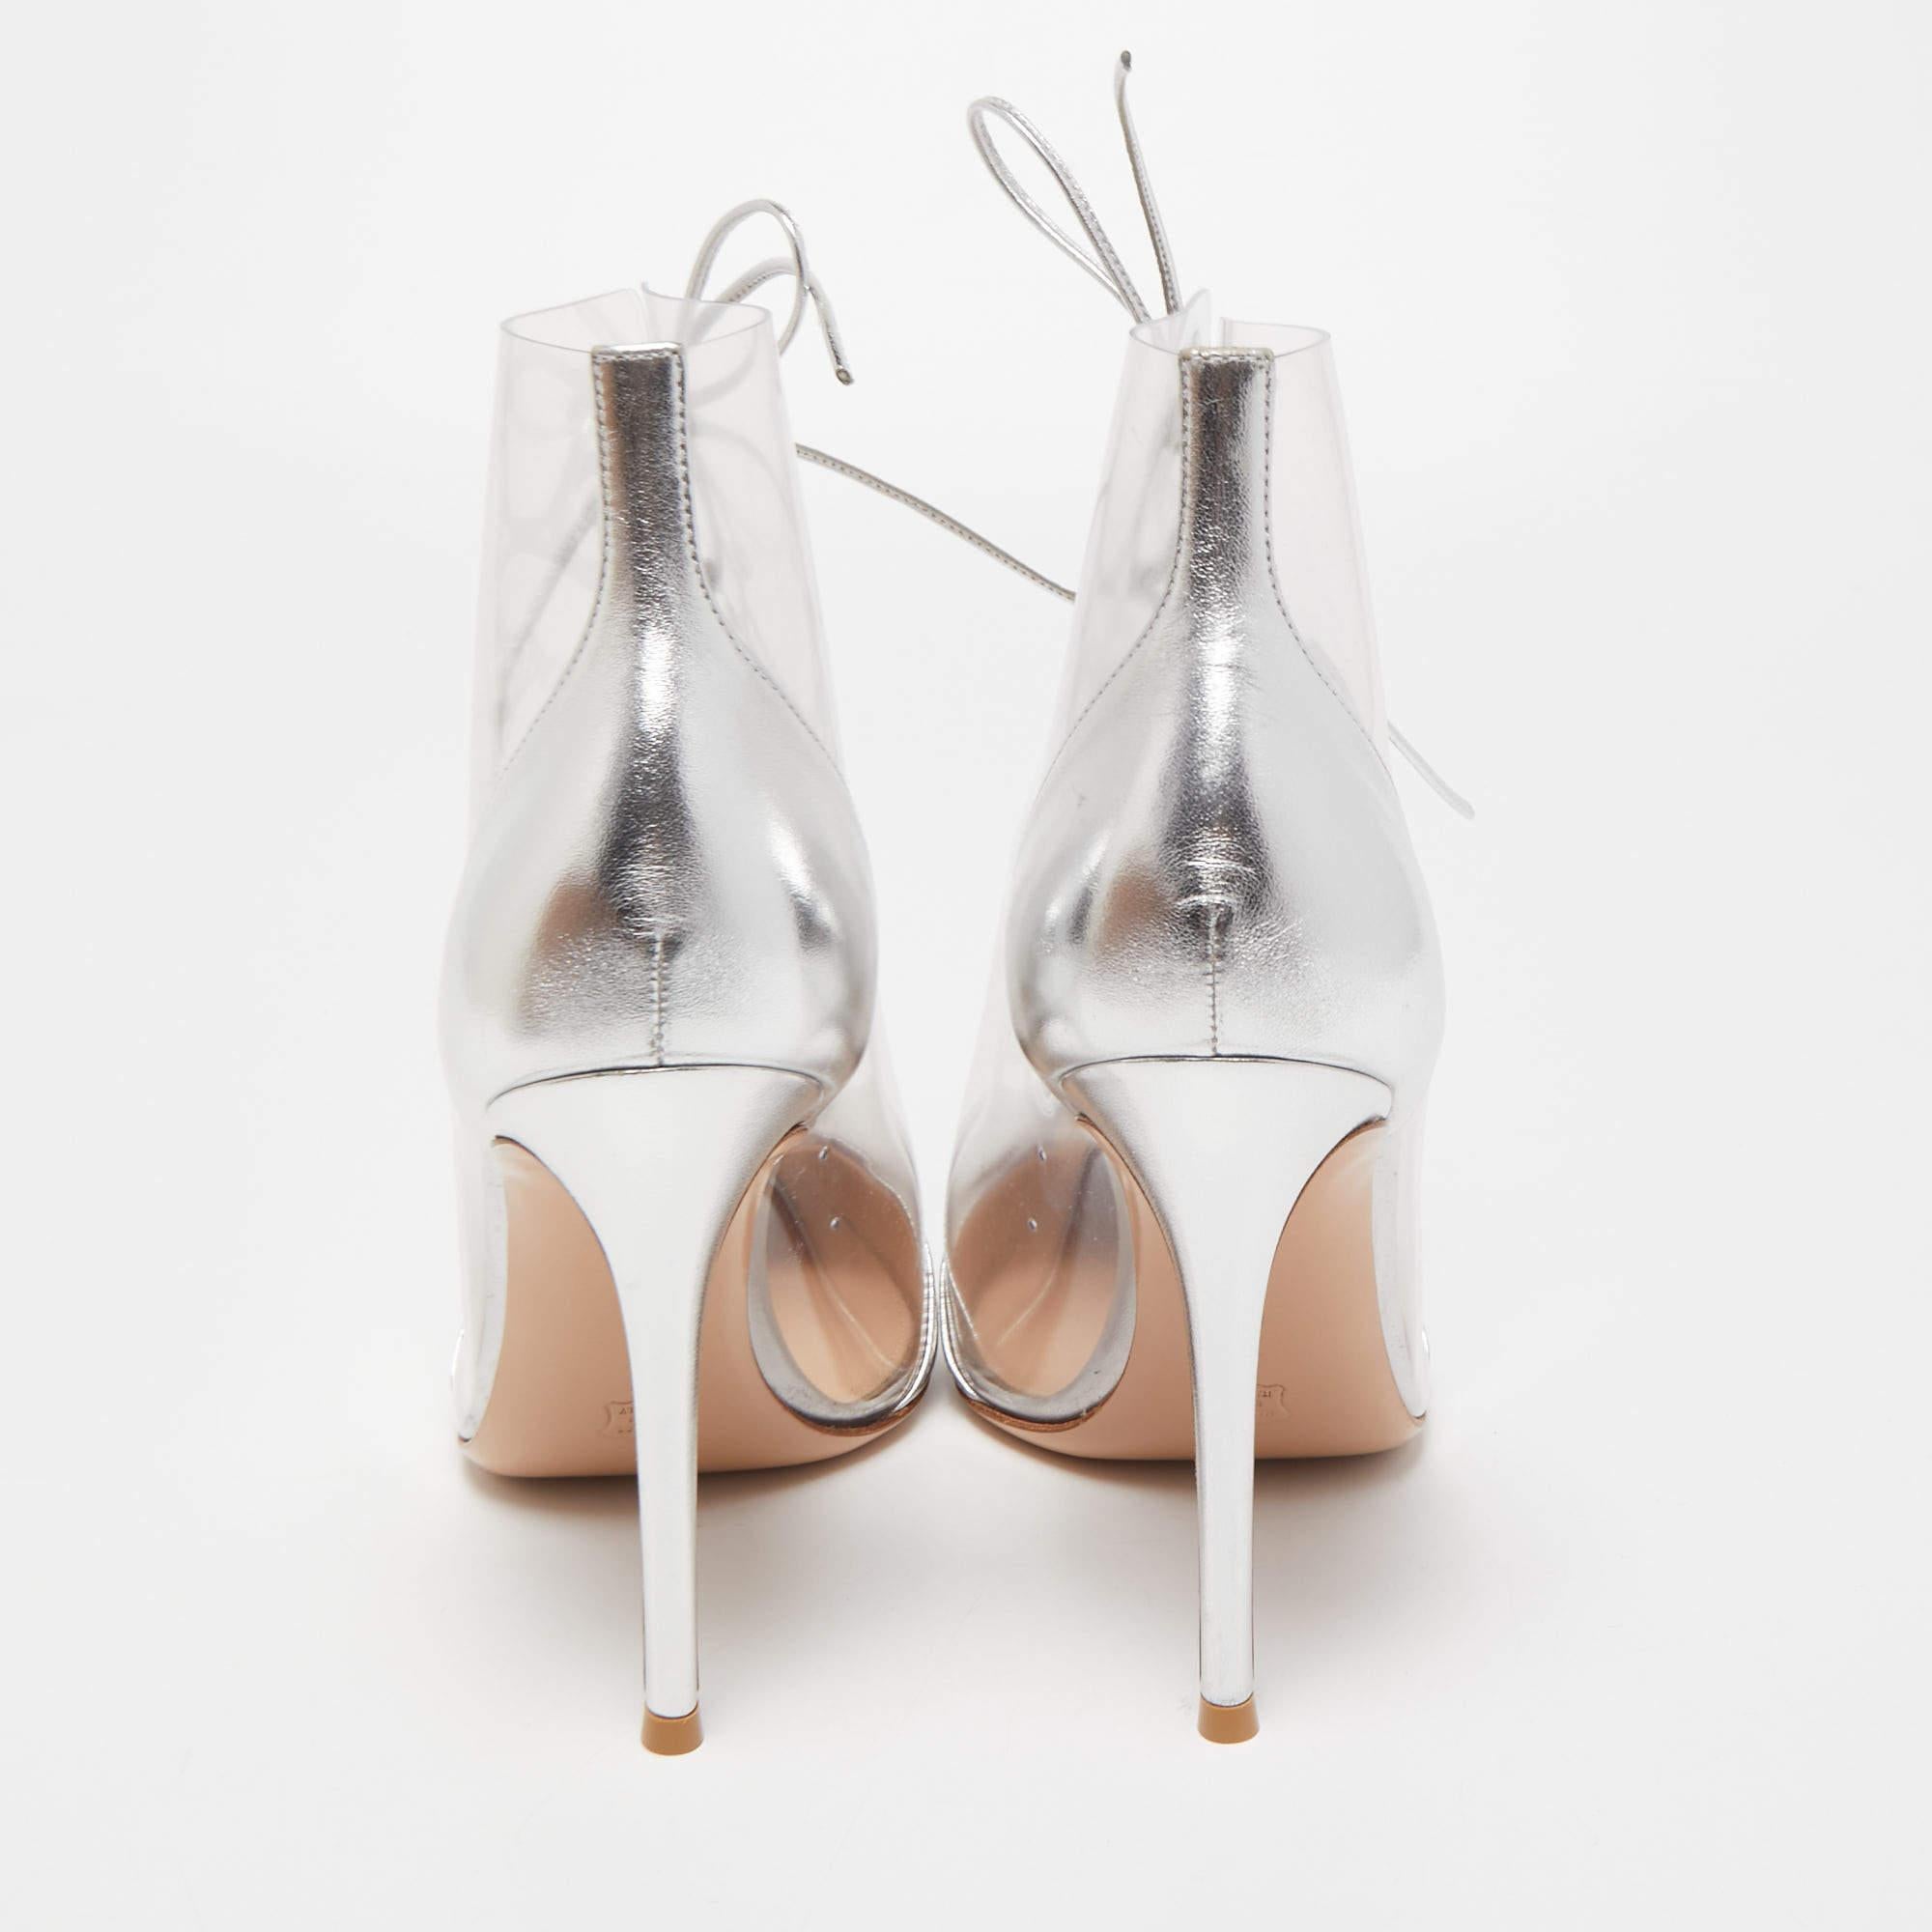 The Gianvito Rossi Plexi booties combine elegance and edginess effortlessly. These stunning booties feature a sleek lace-up design, crafted with a mix of transparent PVC and supple leather. The pointed toe and stiletto heel add a touch of